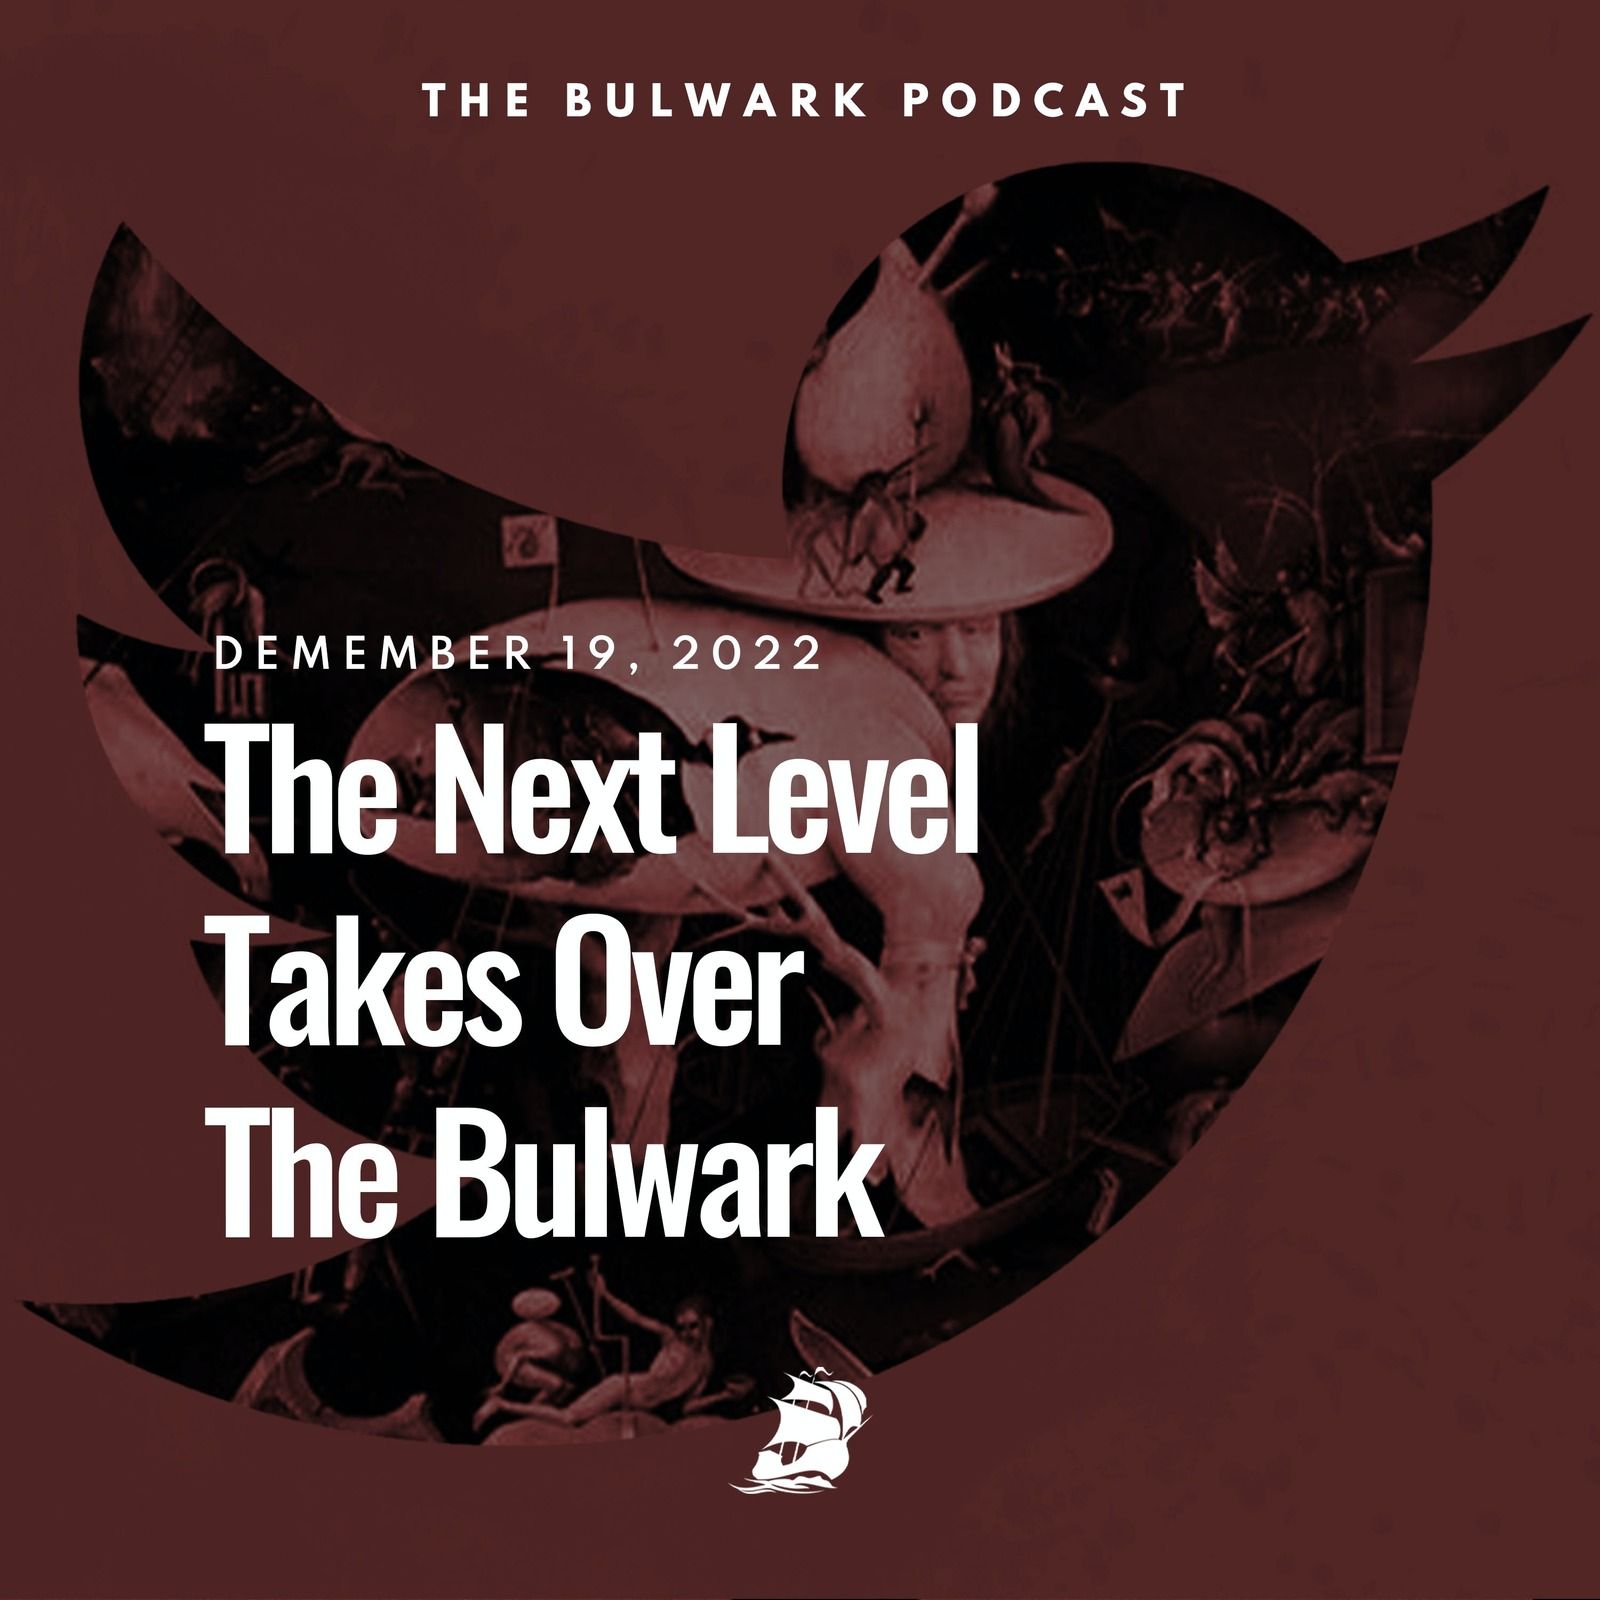 The Next Level Takes Over The Bulwark by The Bulwark Podcast